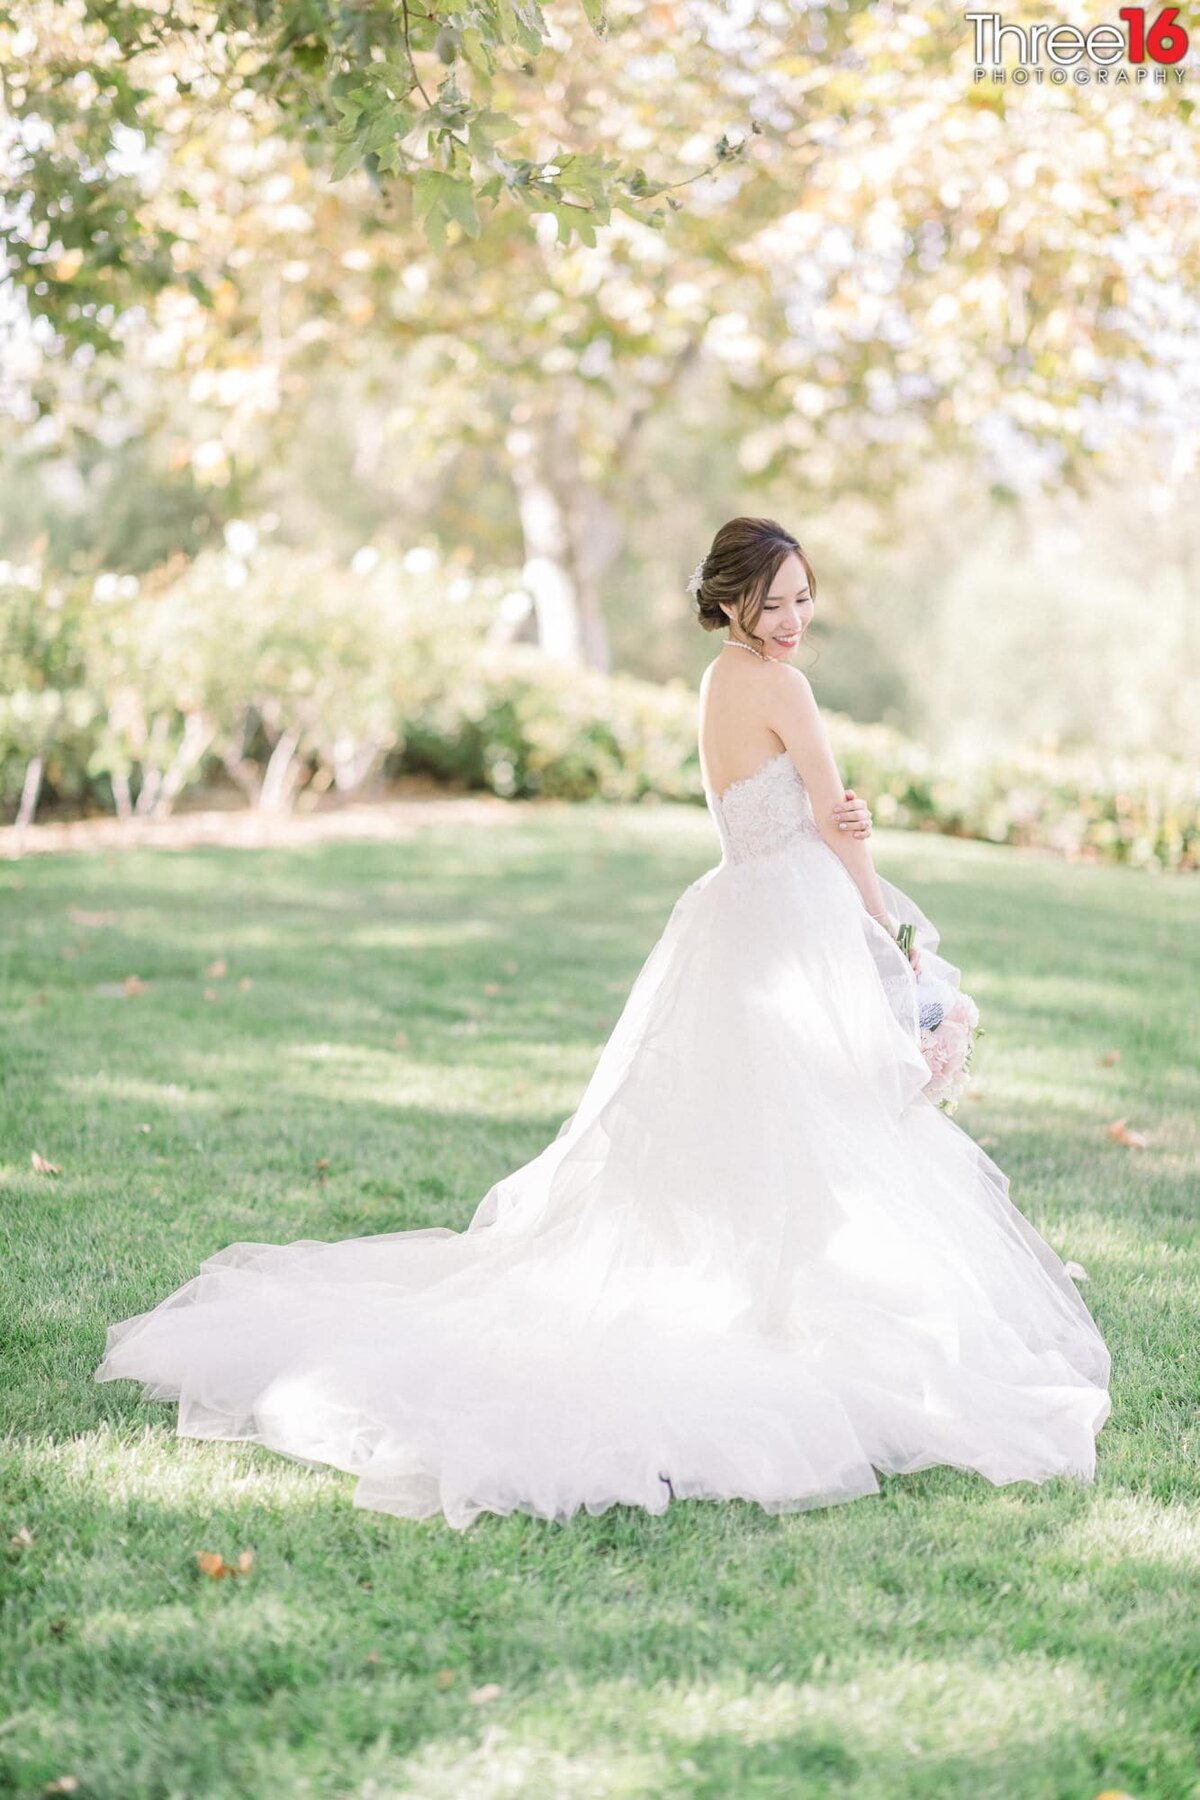 Beautiful Bride poses by looking down at her fanned out dress train